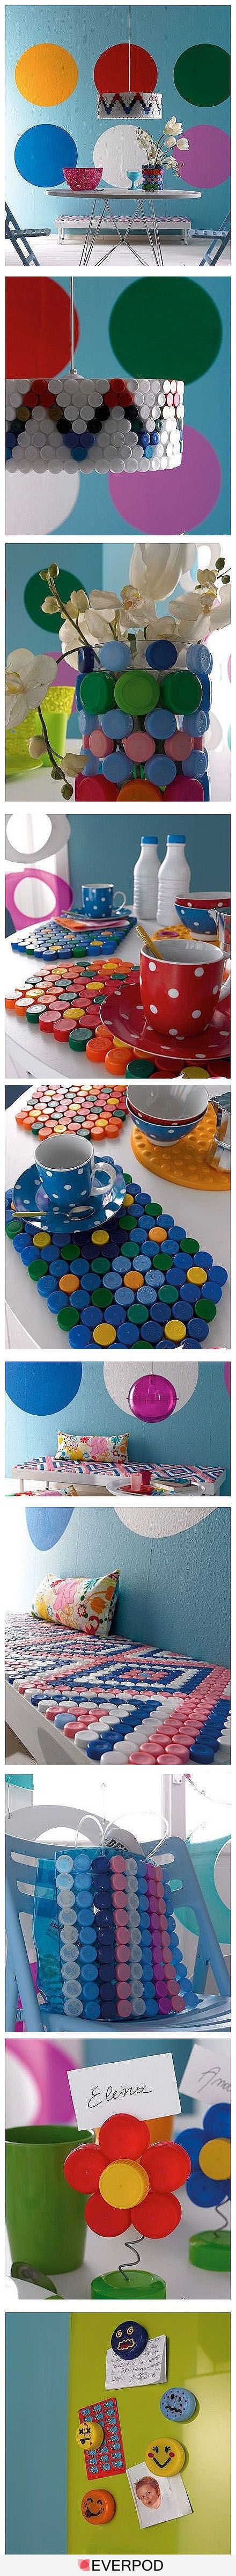 creative bottle caps crafts and projects-homesthetics (20)